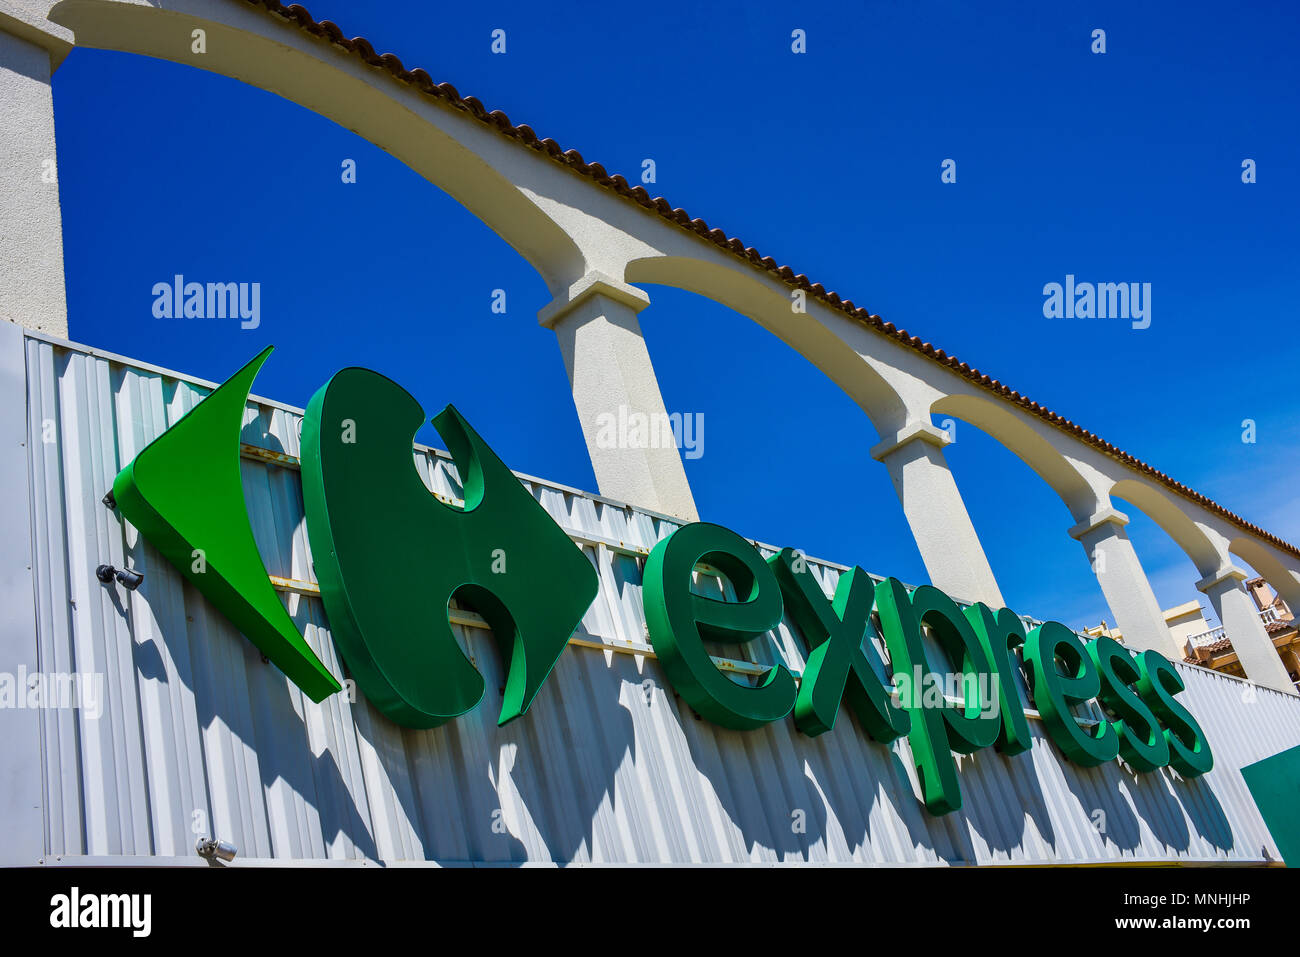 Express, the small local brand of Carrefour. Carrefour Express brand logo in Guardamar del Segura, Spain. Blue sky. French multinational Stock Photo